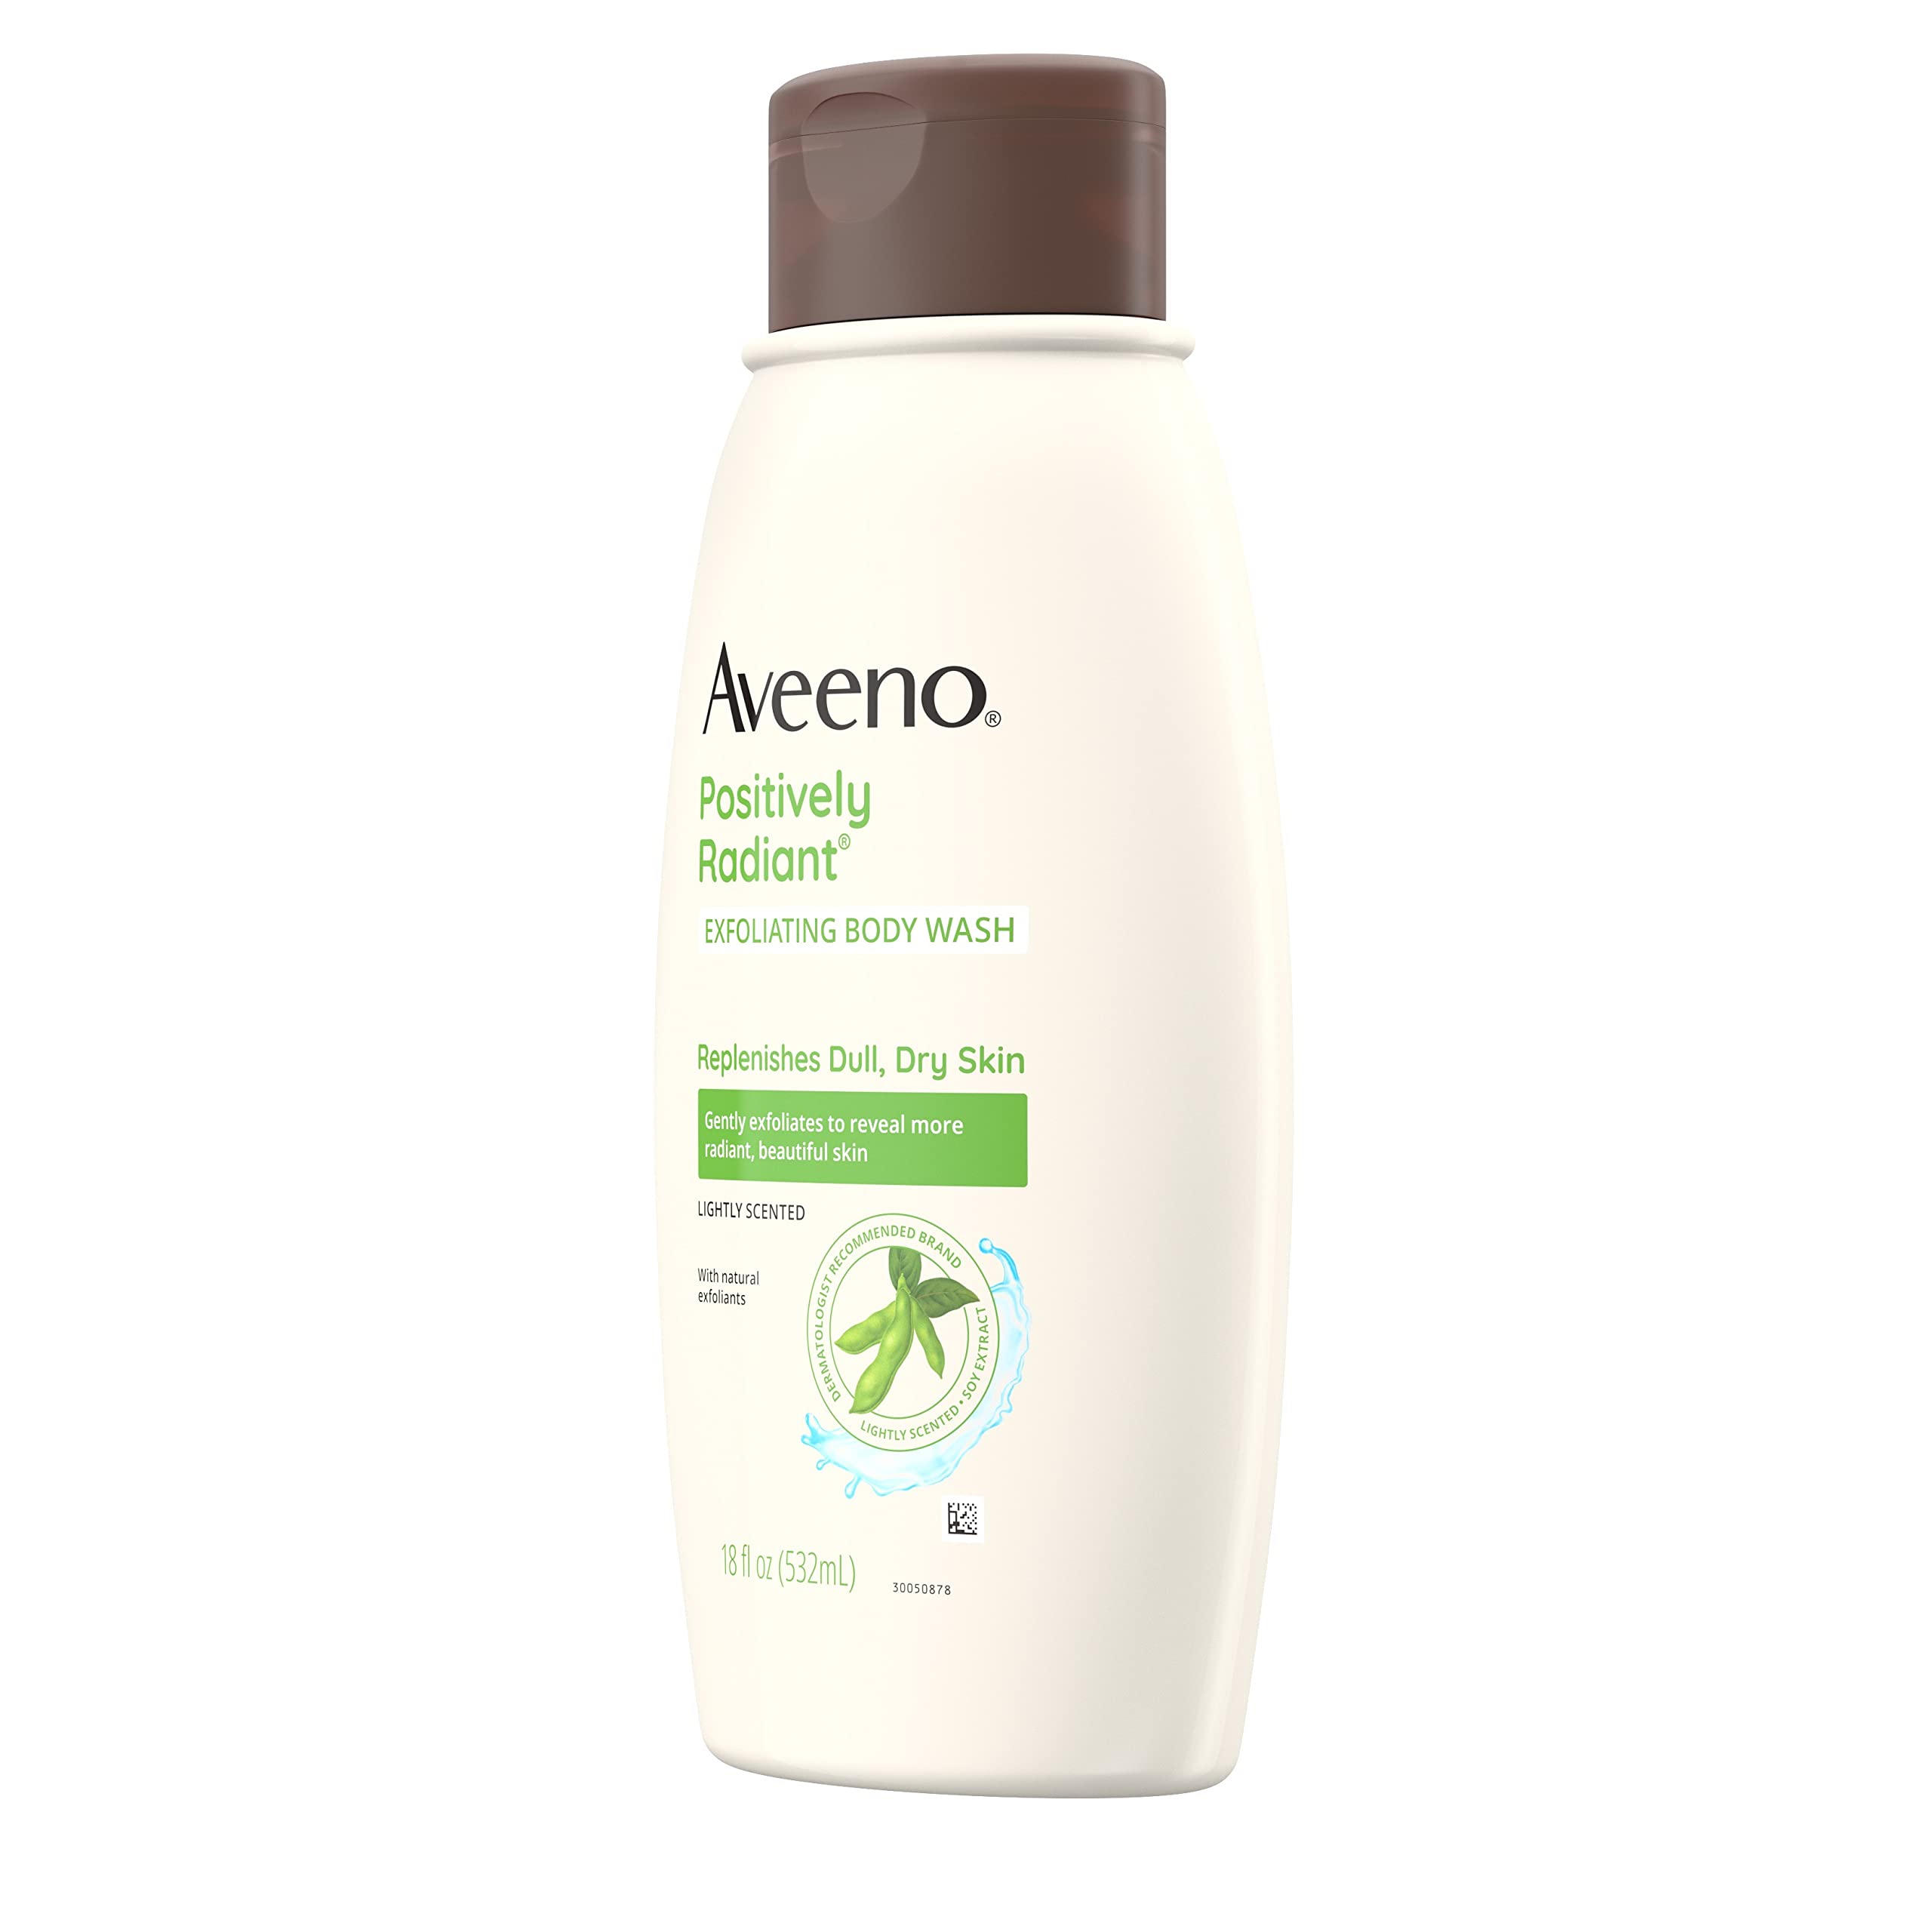 Aveeno Positively Radiant Exfoliating Body Wash with Soy Extract, Lightly Scented Body Cleanser Replenishes Dull, Dry Skin & Exfoliates to Reveal More Radiant, Beautiful Skin, 18 fl. oz